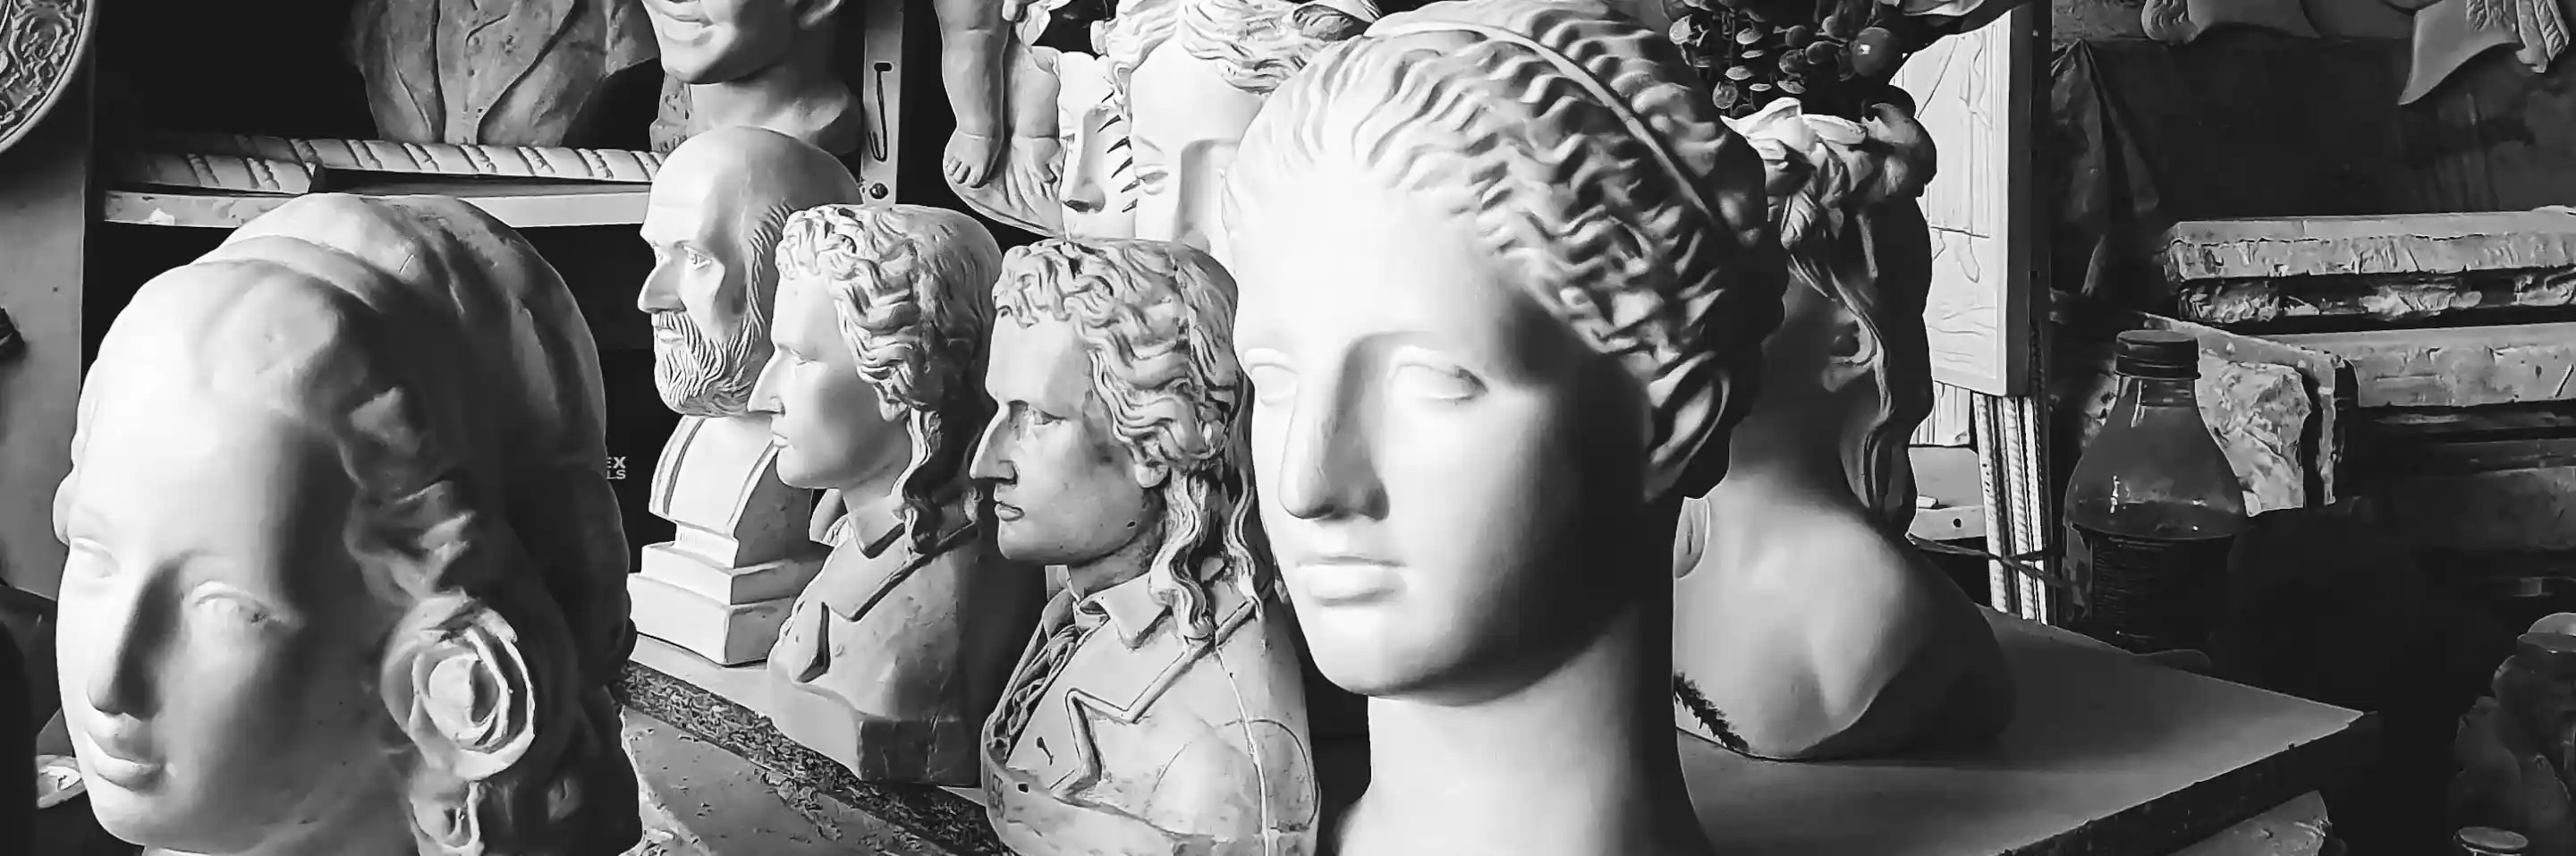 Heads of statues